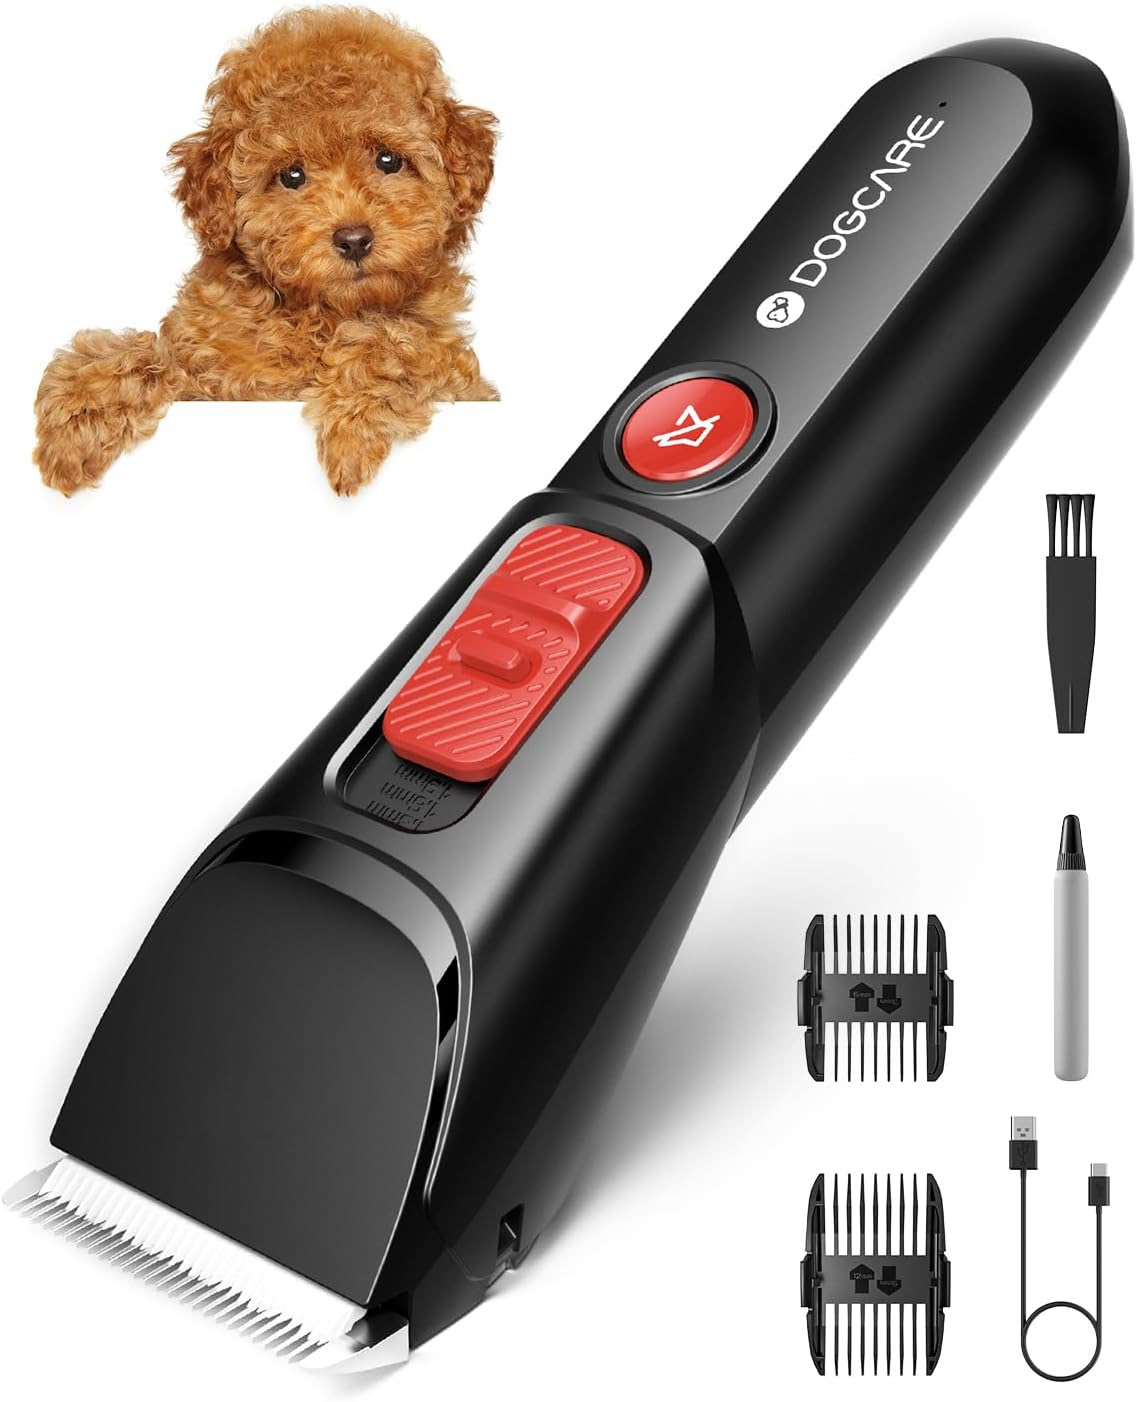 DOGCARE Cordless Rechargeable Dog Grooming Clippers. 1800units. 